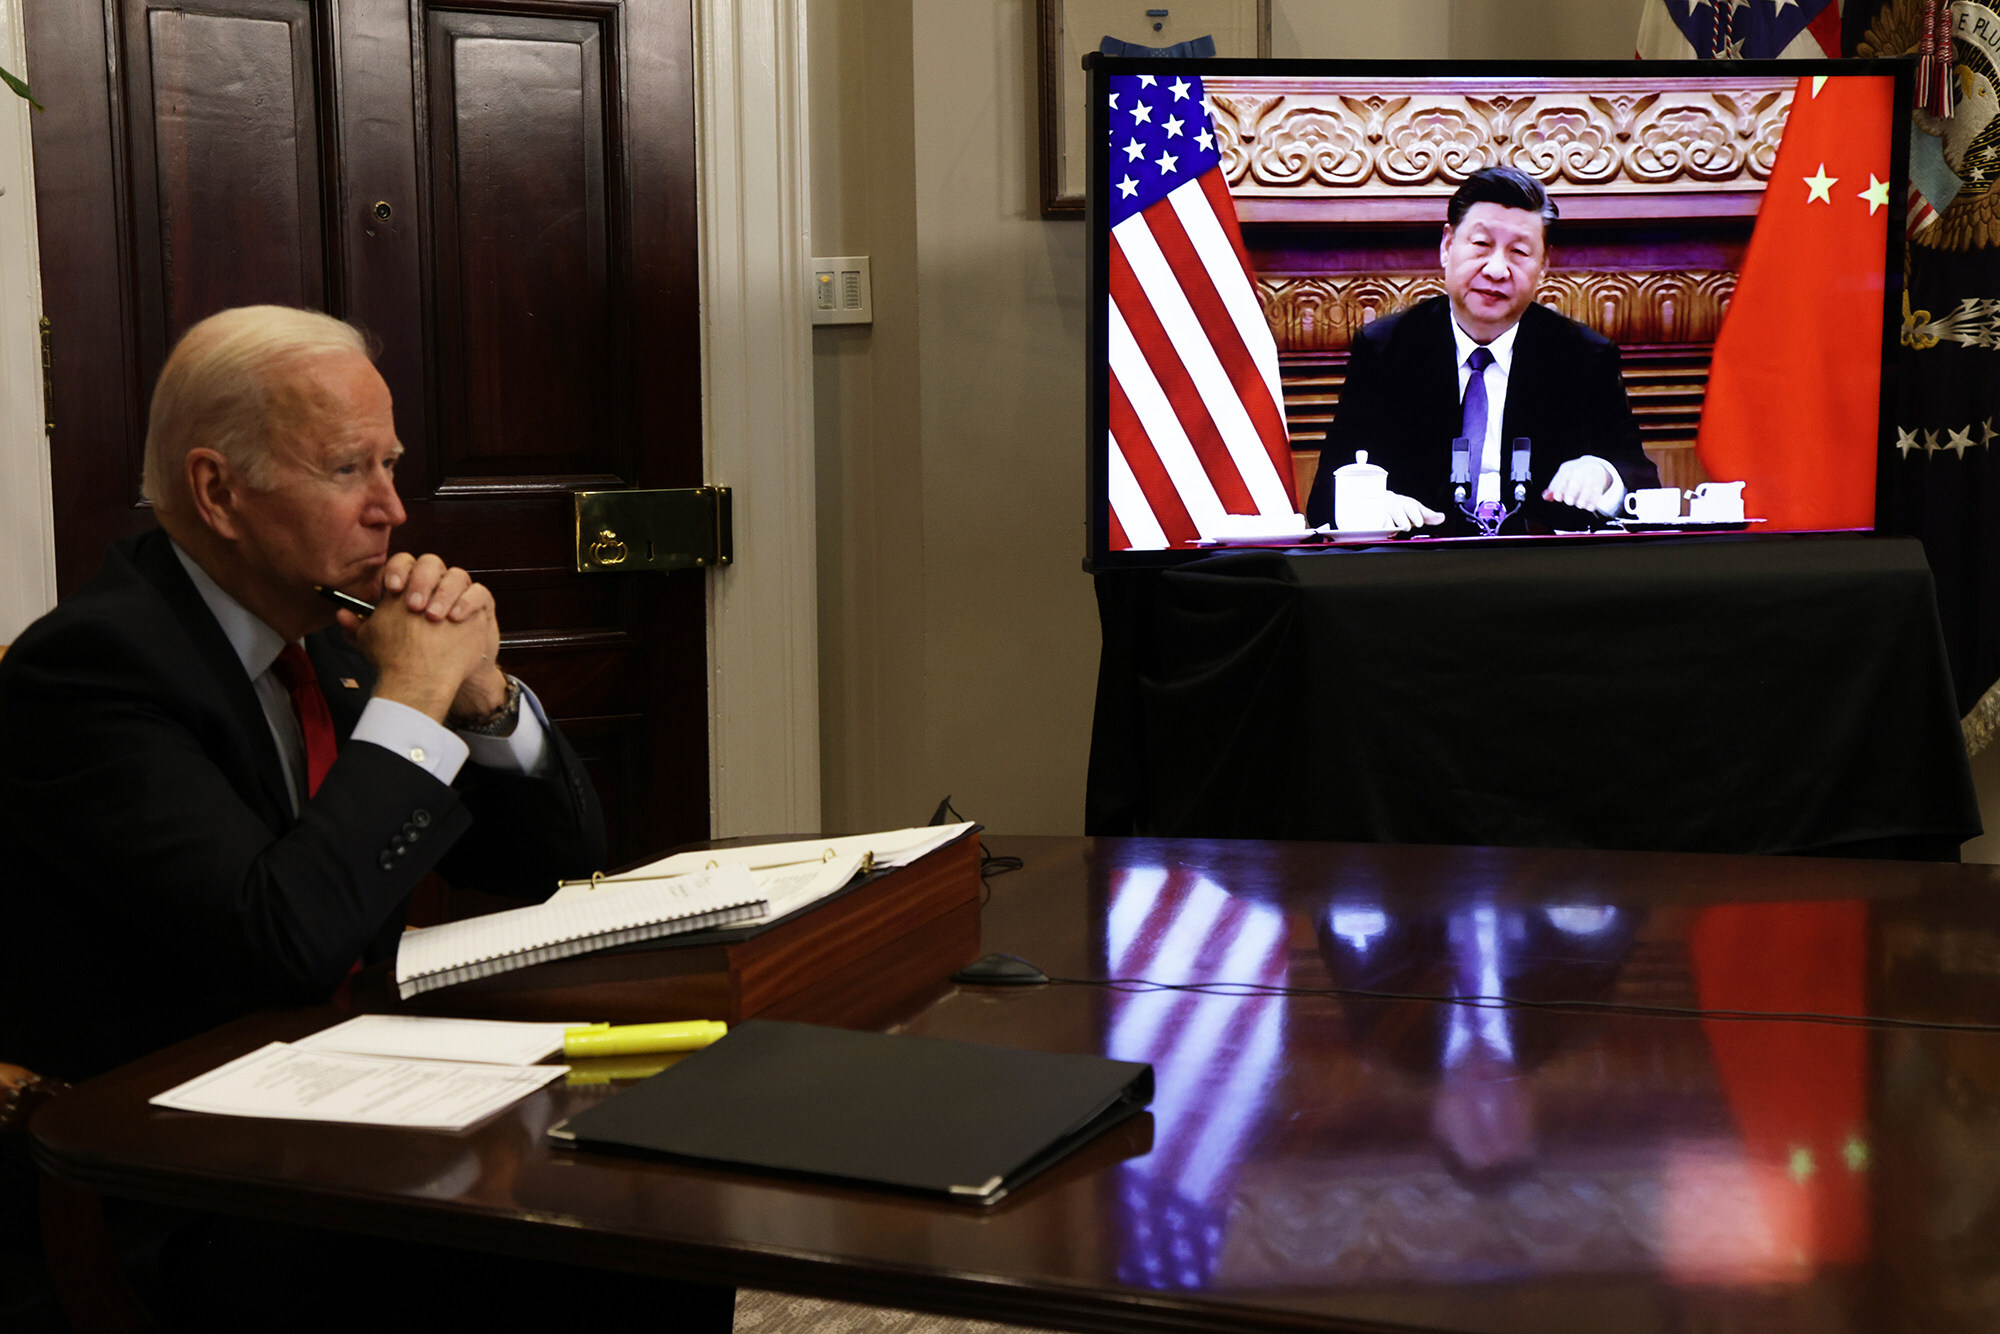 US President Joe Biden participates in a virtual meeting with President Xi Jinping at the Roosevelt Room of the White House in Washington on November 15. Photo: TNS